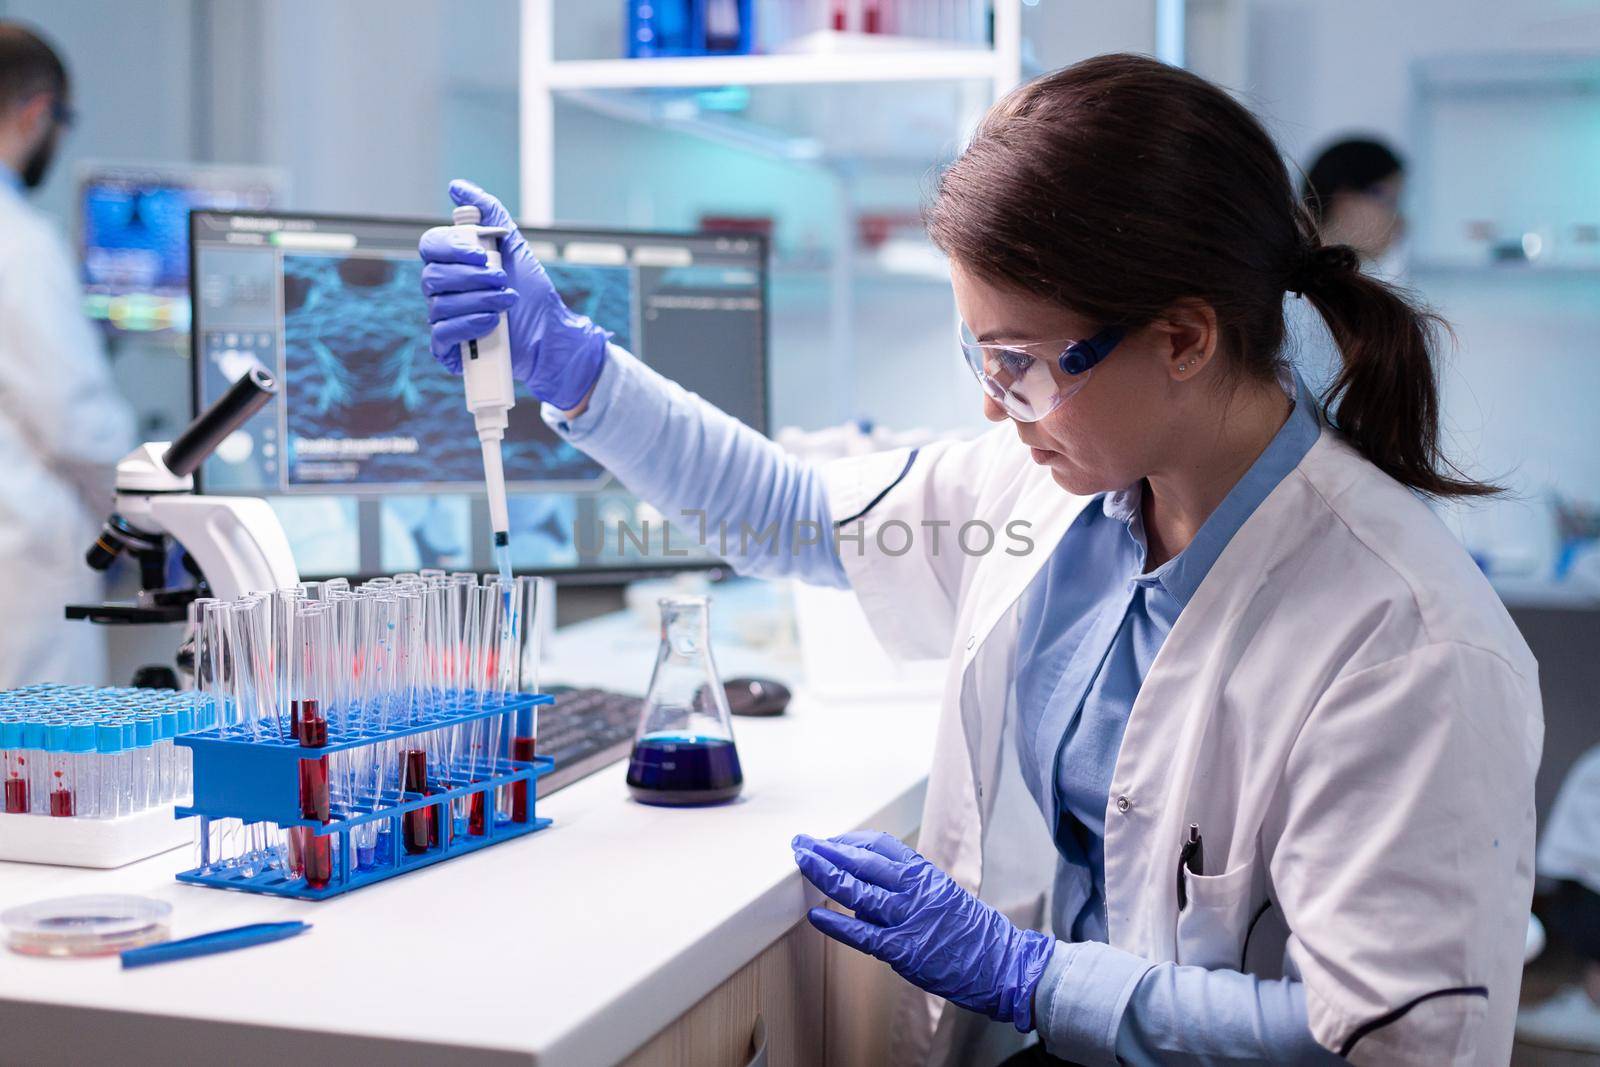 Concentrated professional woman scientist in laboratory working with a micropipette and a dropper. Biology doctor discovery scientifc experiment with technology equipment industry